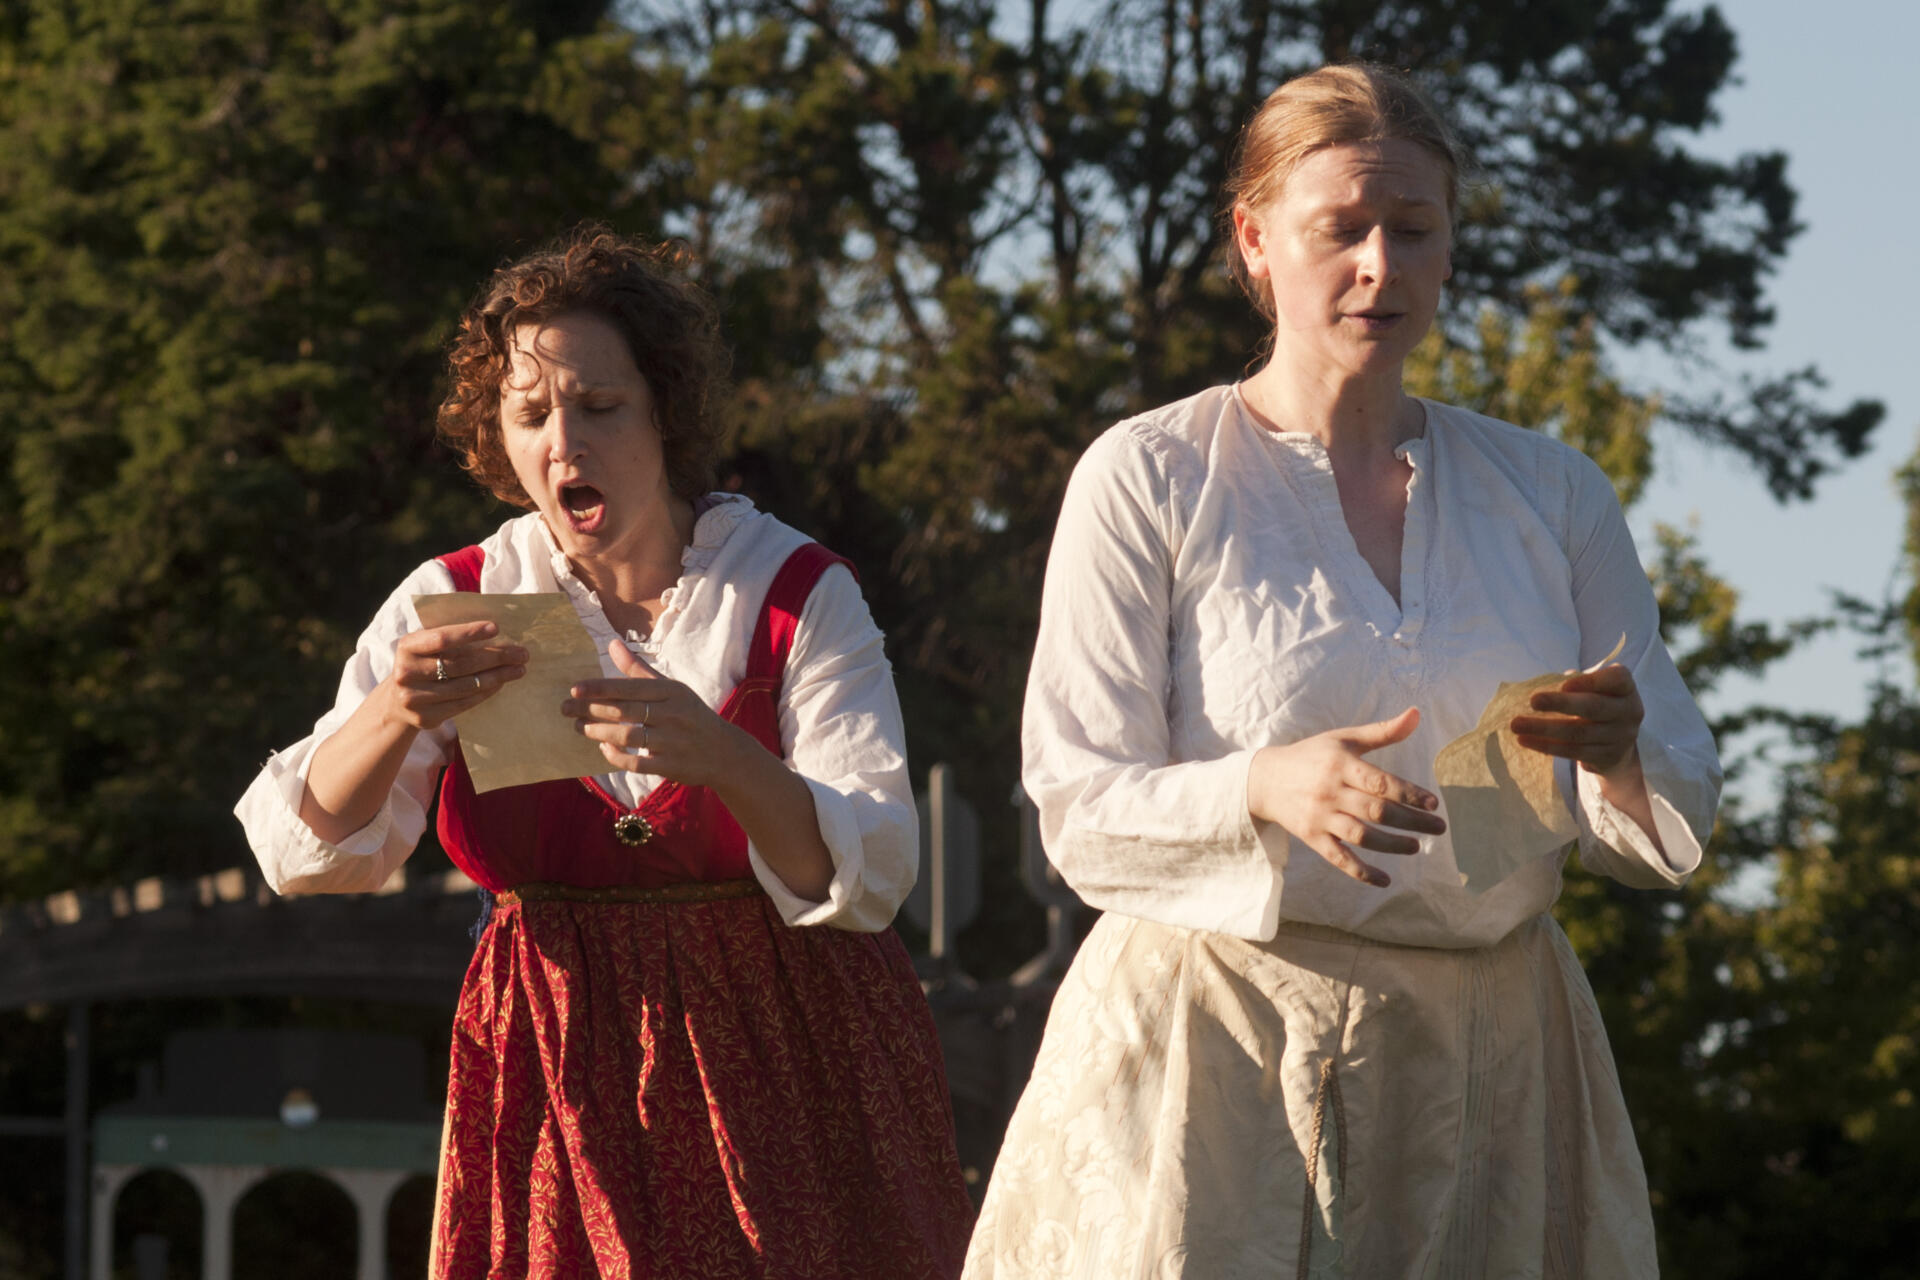 Mandy Nelson and Anna Richardson in Backyard Bard - Merry Wives of Windsor - 2013